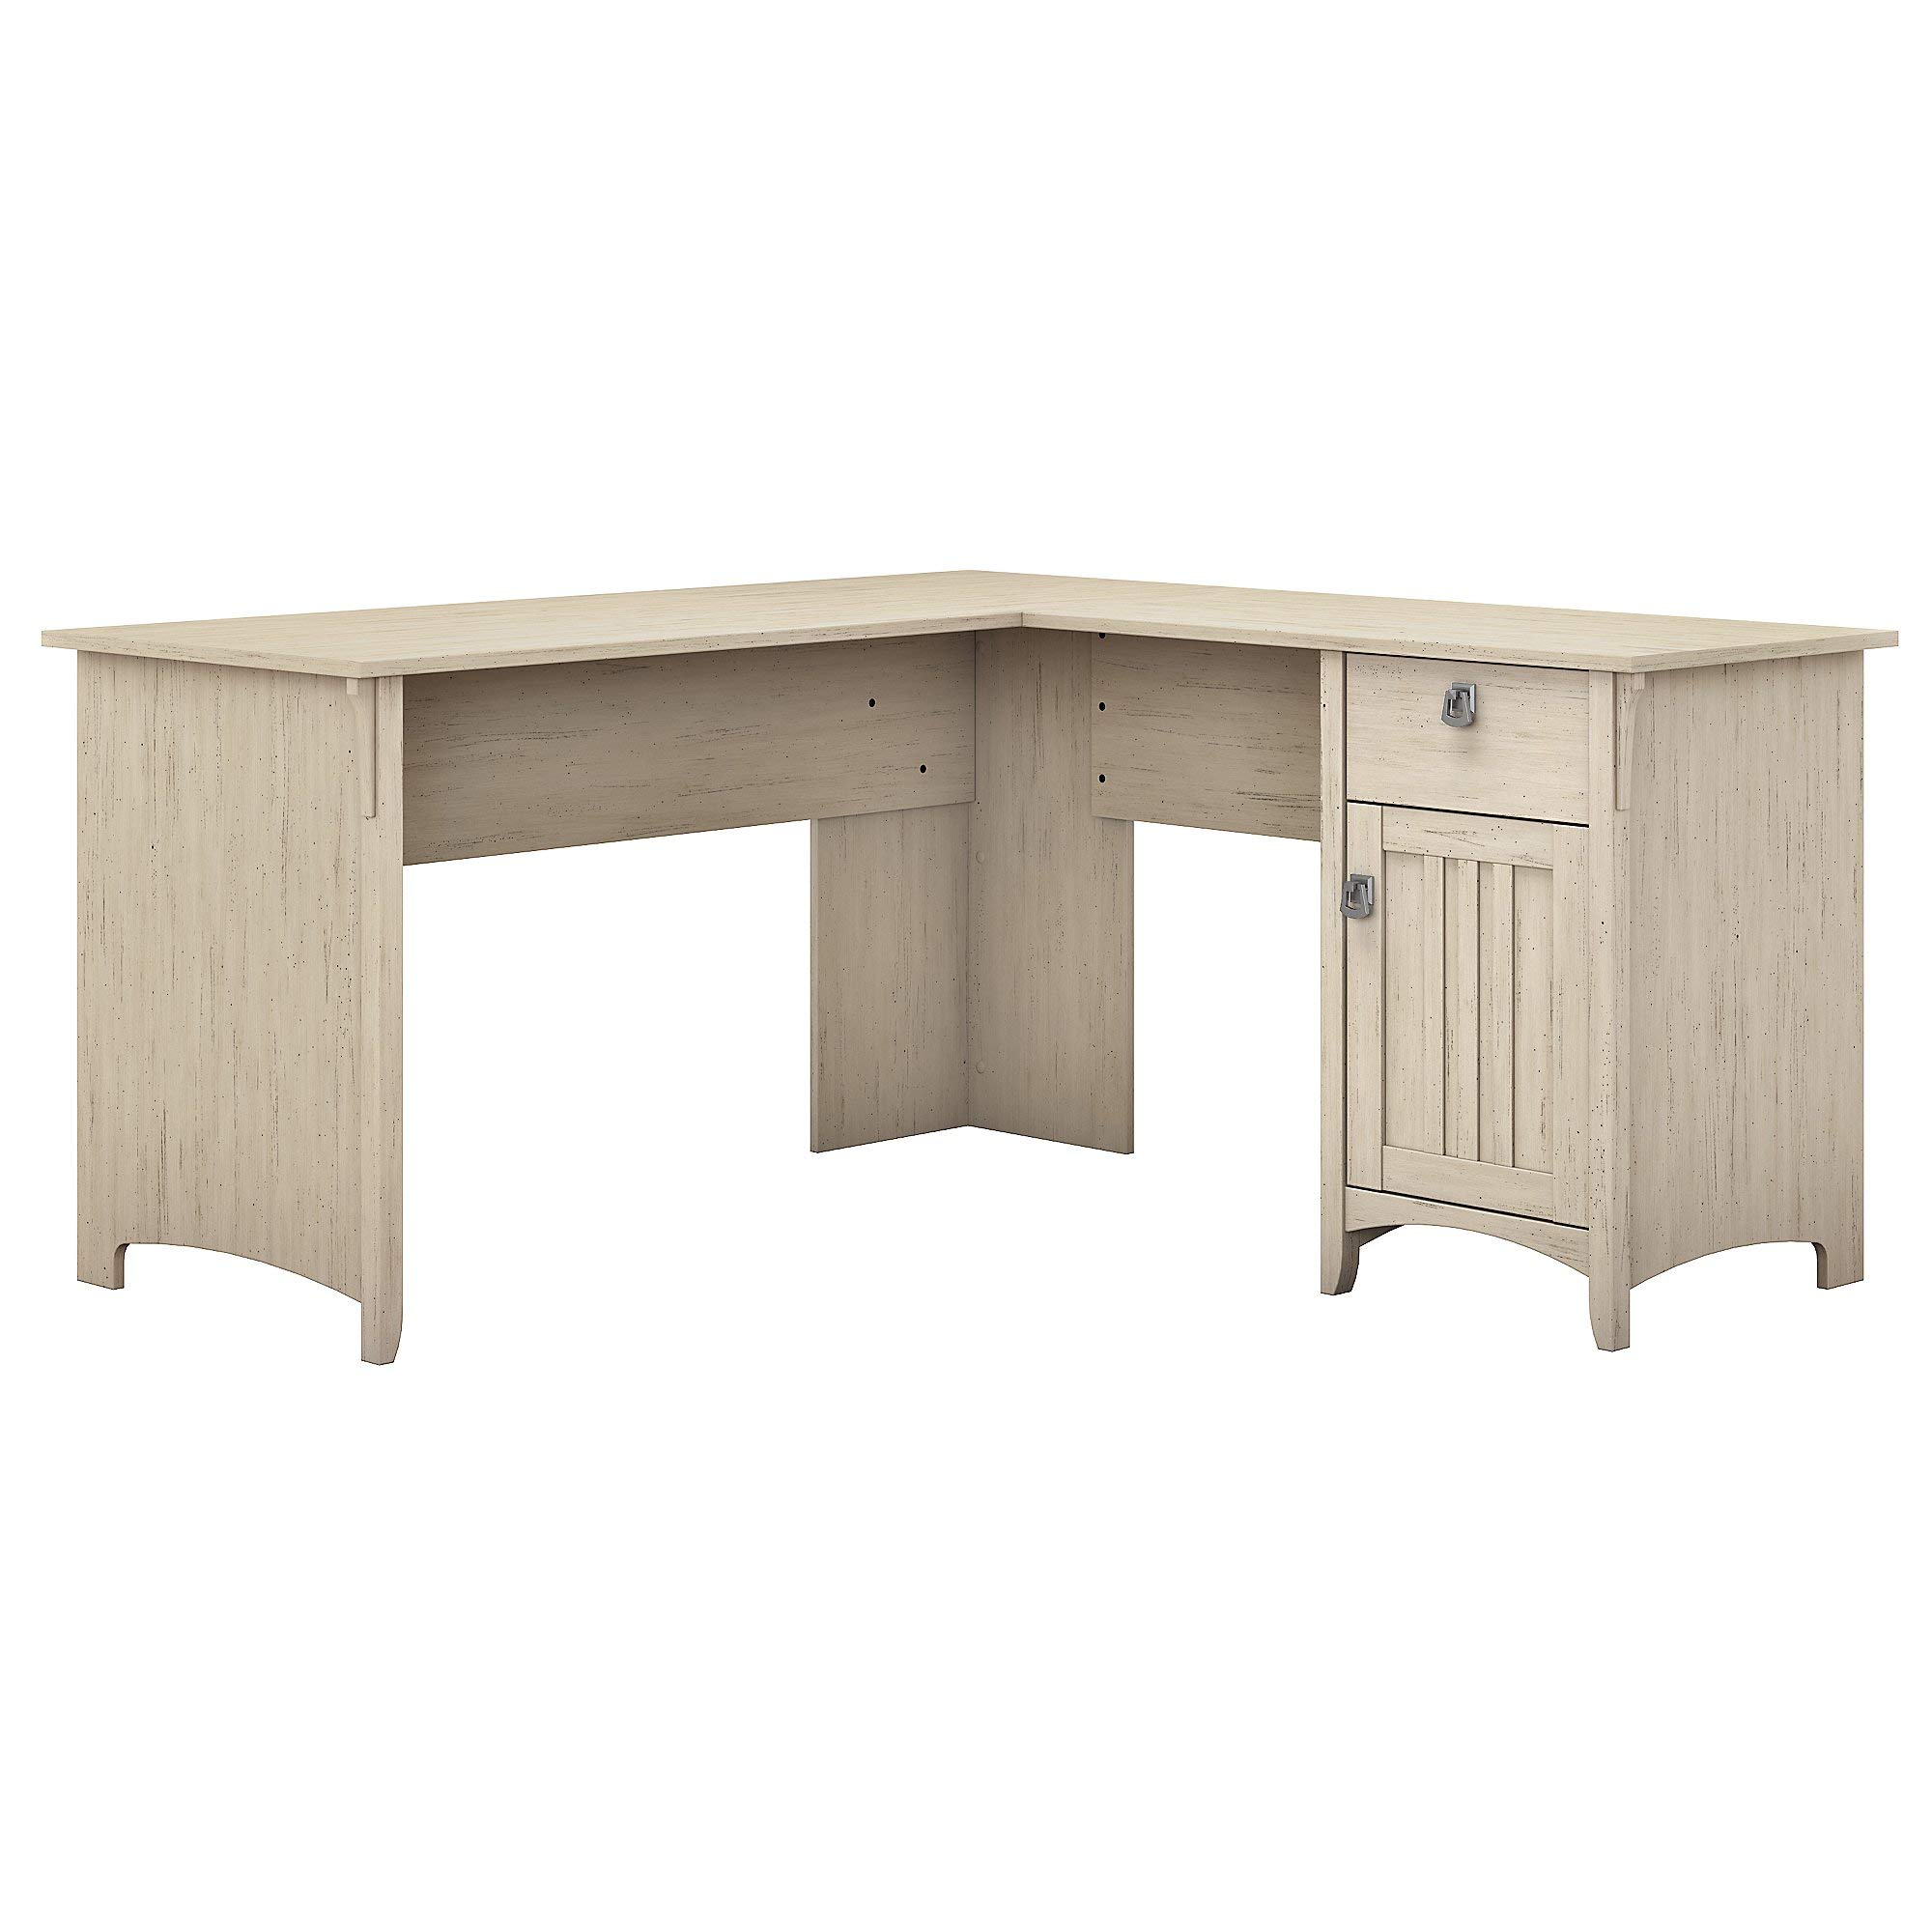 Bush Furniture Salinas L Shaped Desk with Storage in Antique White | Modern Farmhouse Corner Table with Drawers and Cabinets for Home Office, List Price is $505, Now Only $200, You Save $305